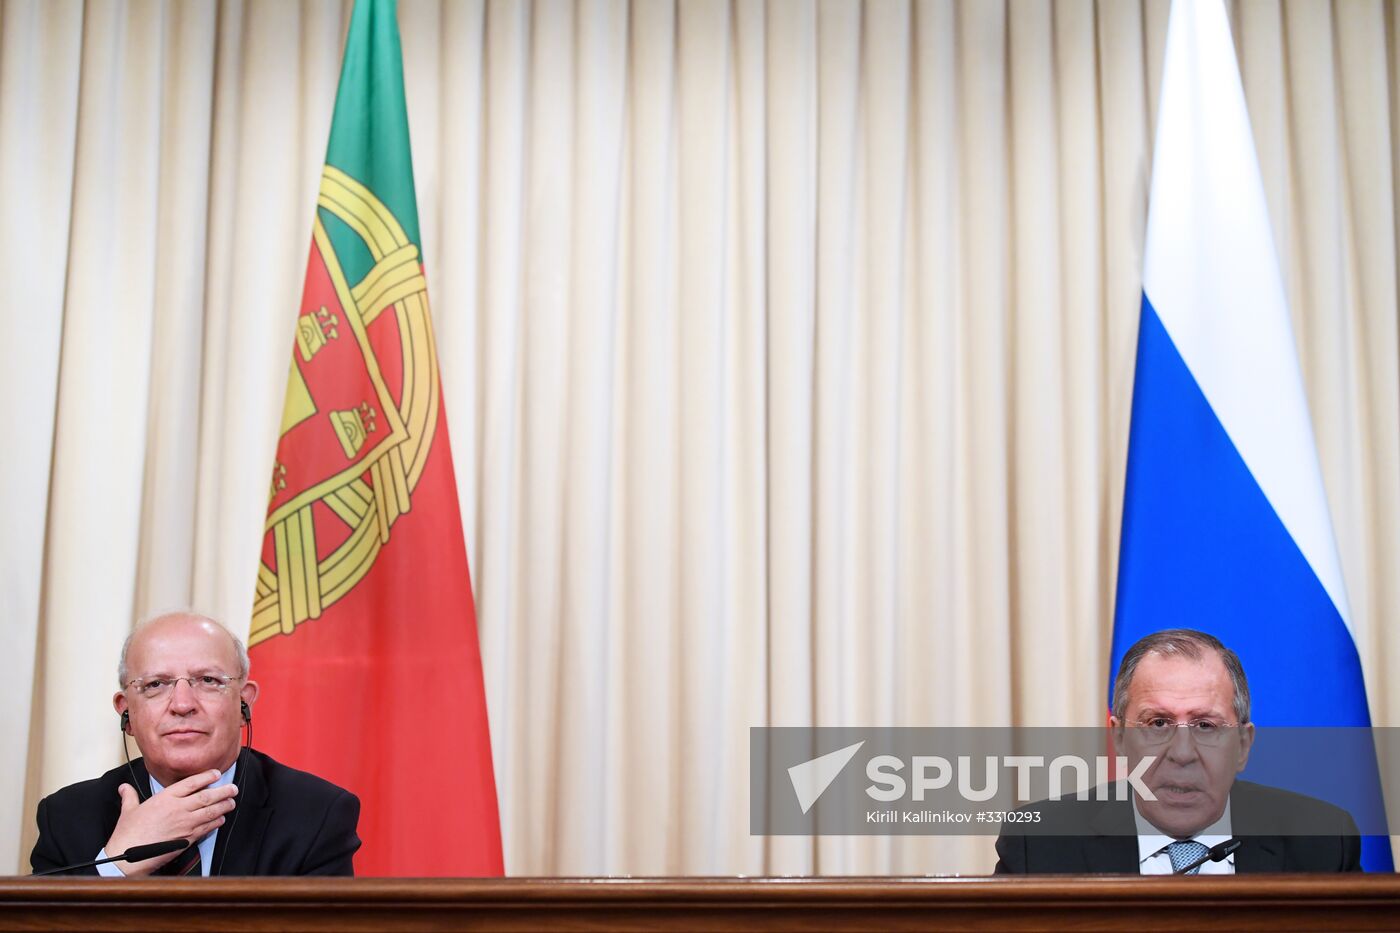 Russian Foreign Minister Lavrov meets with his Portuguese counterpart Santos Silva